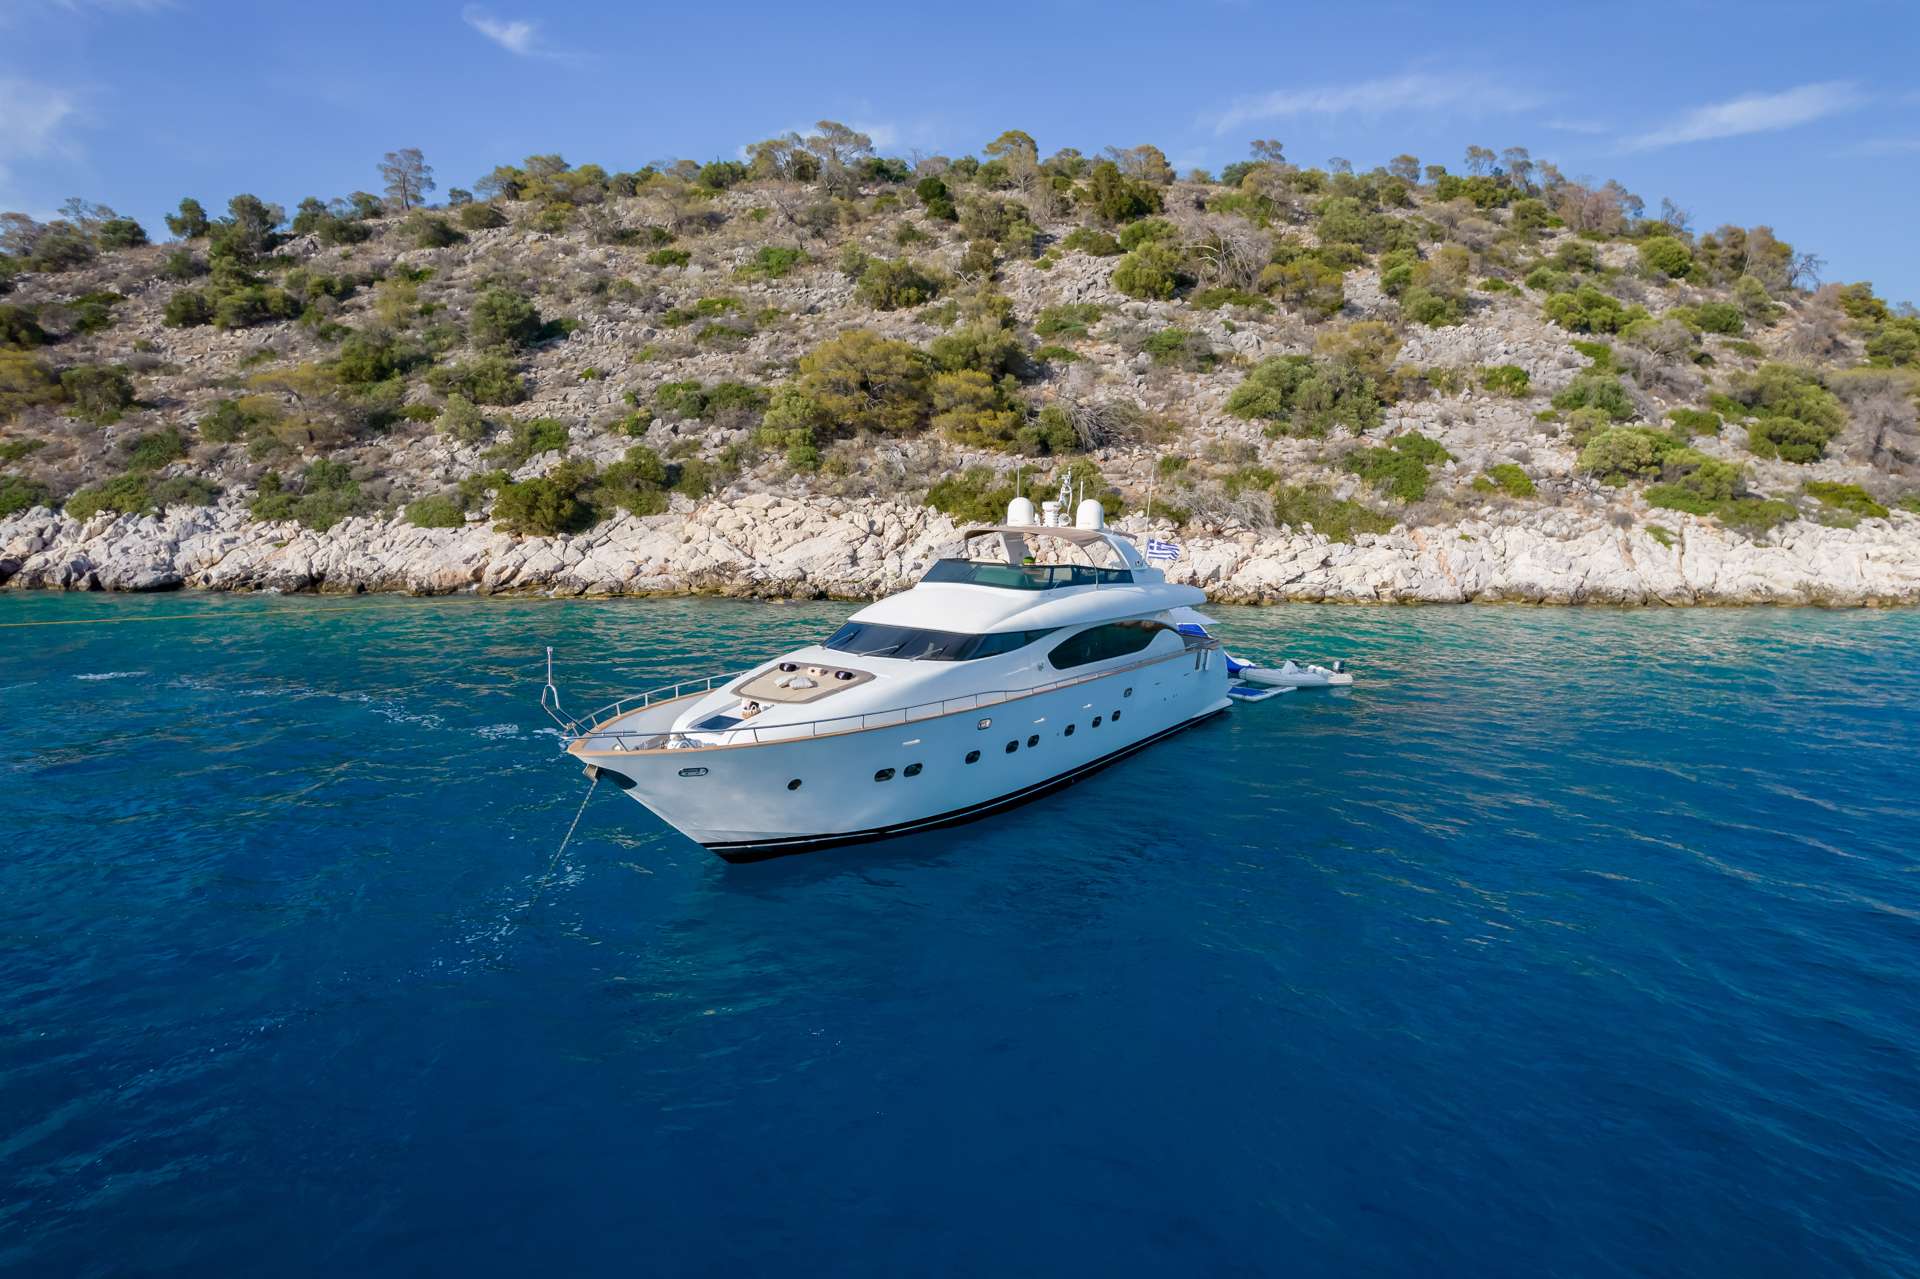 COOKIE - Yacht Charter Sami & Boat hire in Greece & Turkey 1